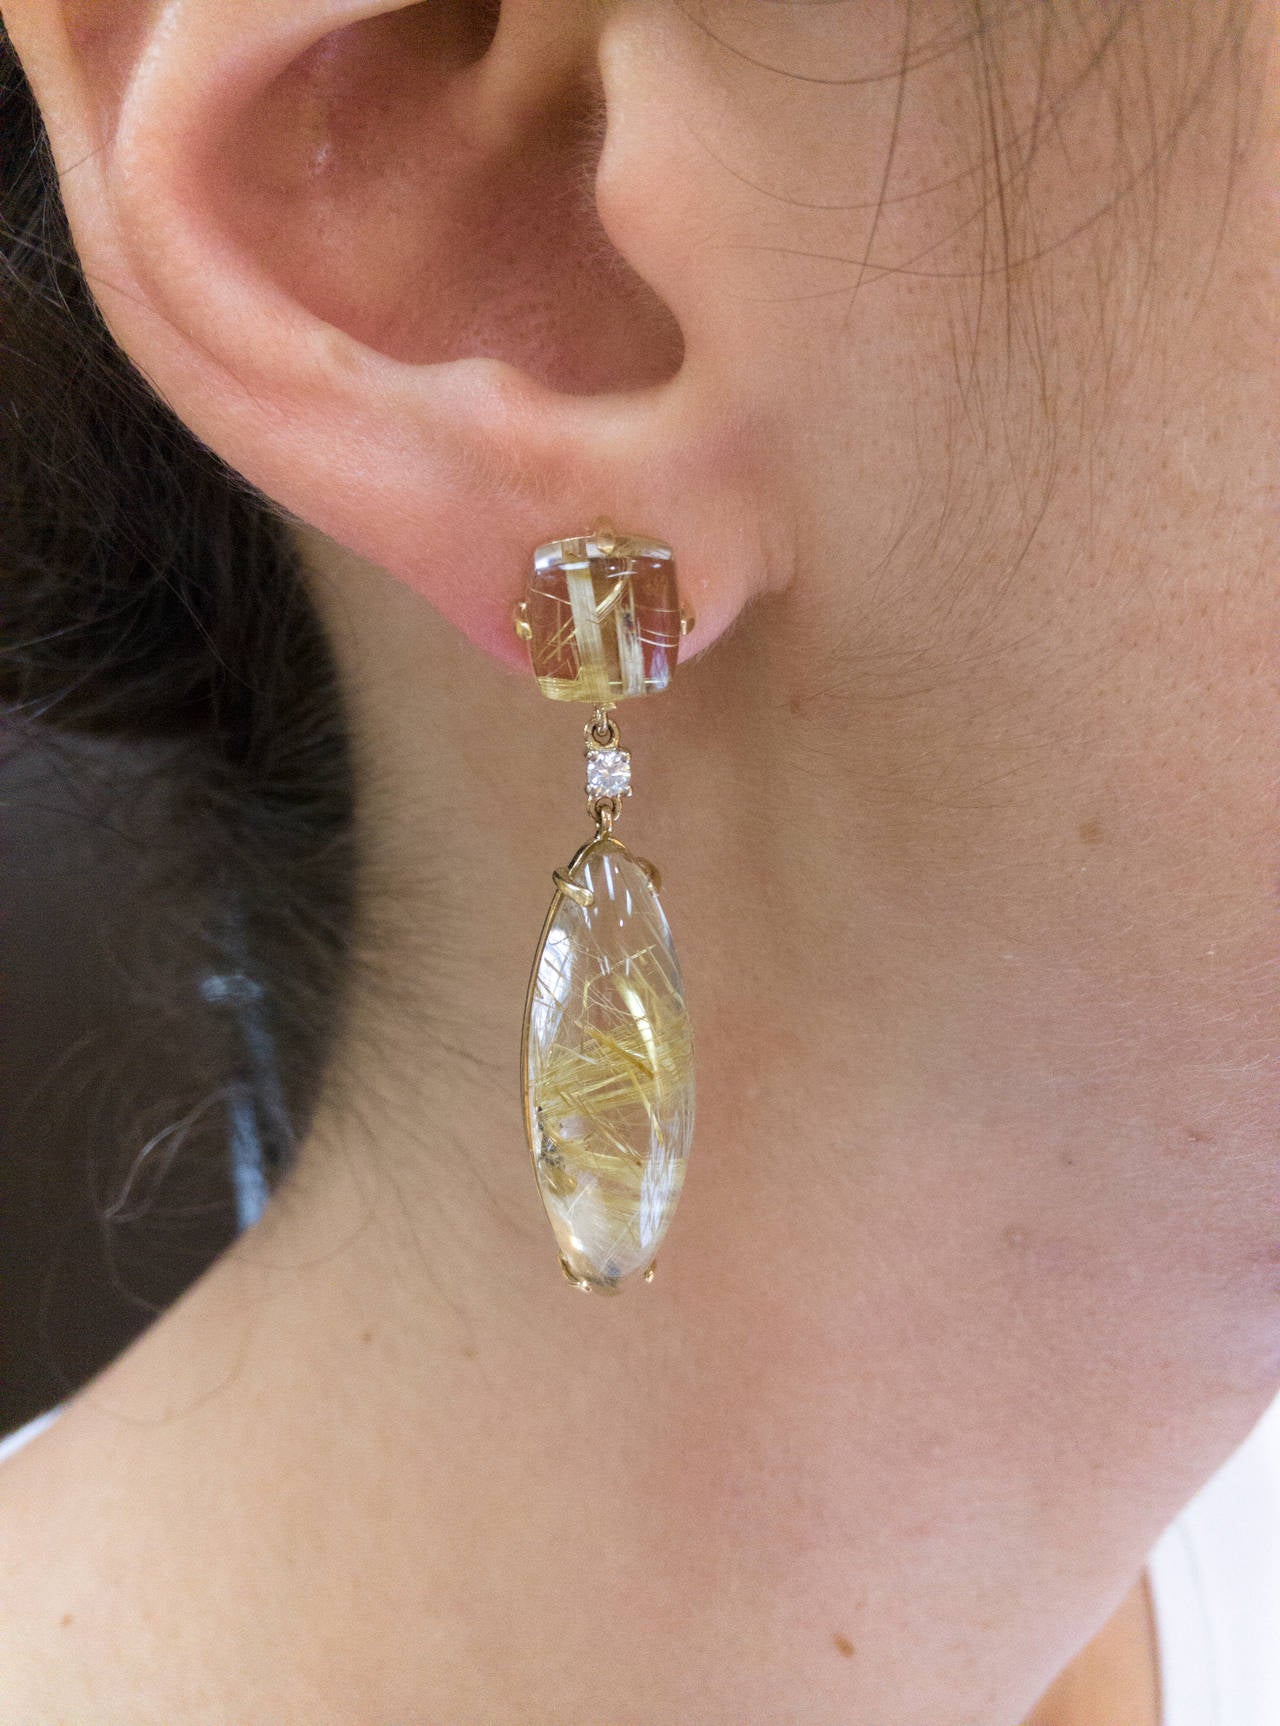 Estate Stylish pair of Fabulous Rutilated Quartz Diamond Gem Stone Dangle Earrings mounted in 14k yellow and white Gold. Approx. sizes: 8.5mm x 8.7mm x 4.2mm; 31mm x 10mm x 7.9mm (deep). Chic and Timeless...taking you effortlessly from Day to